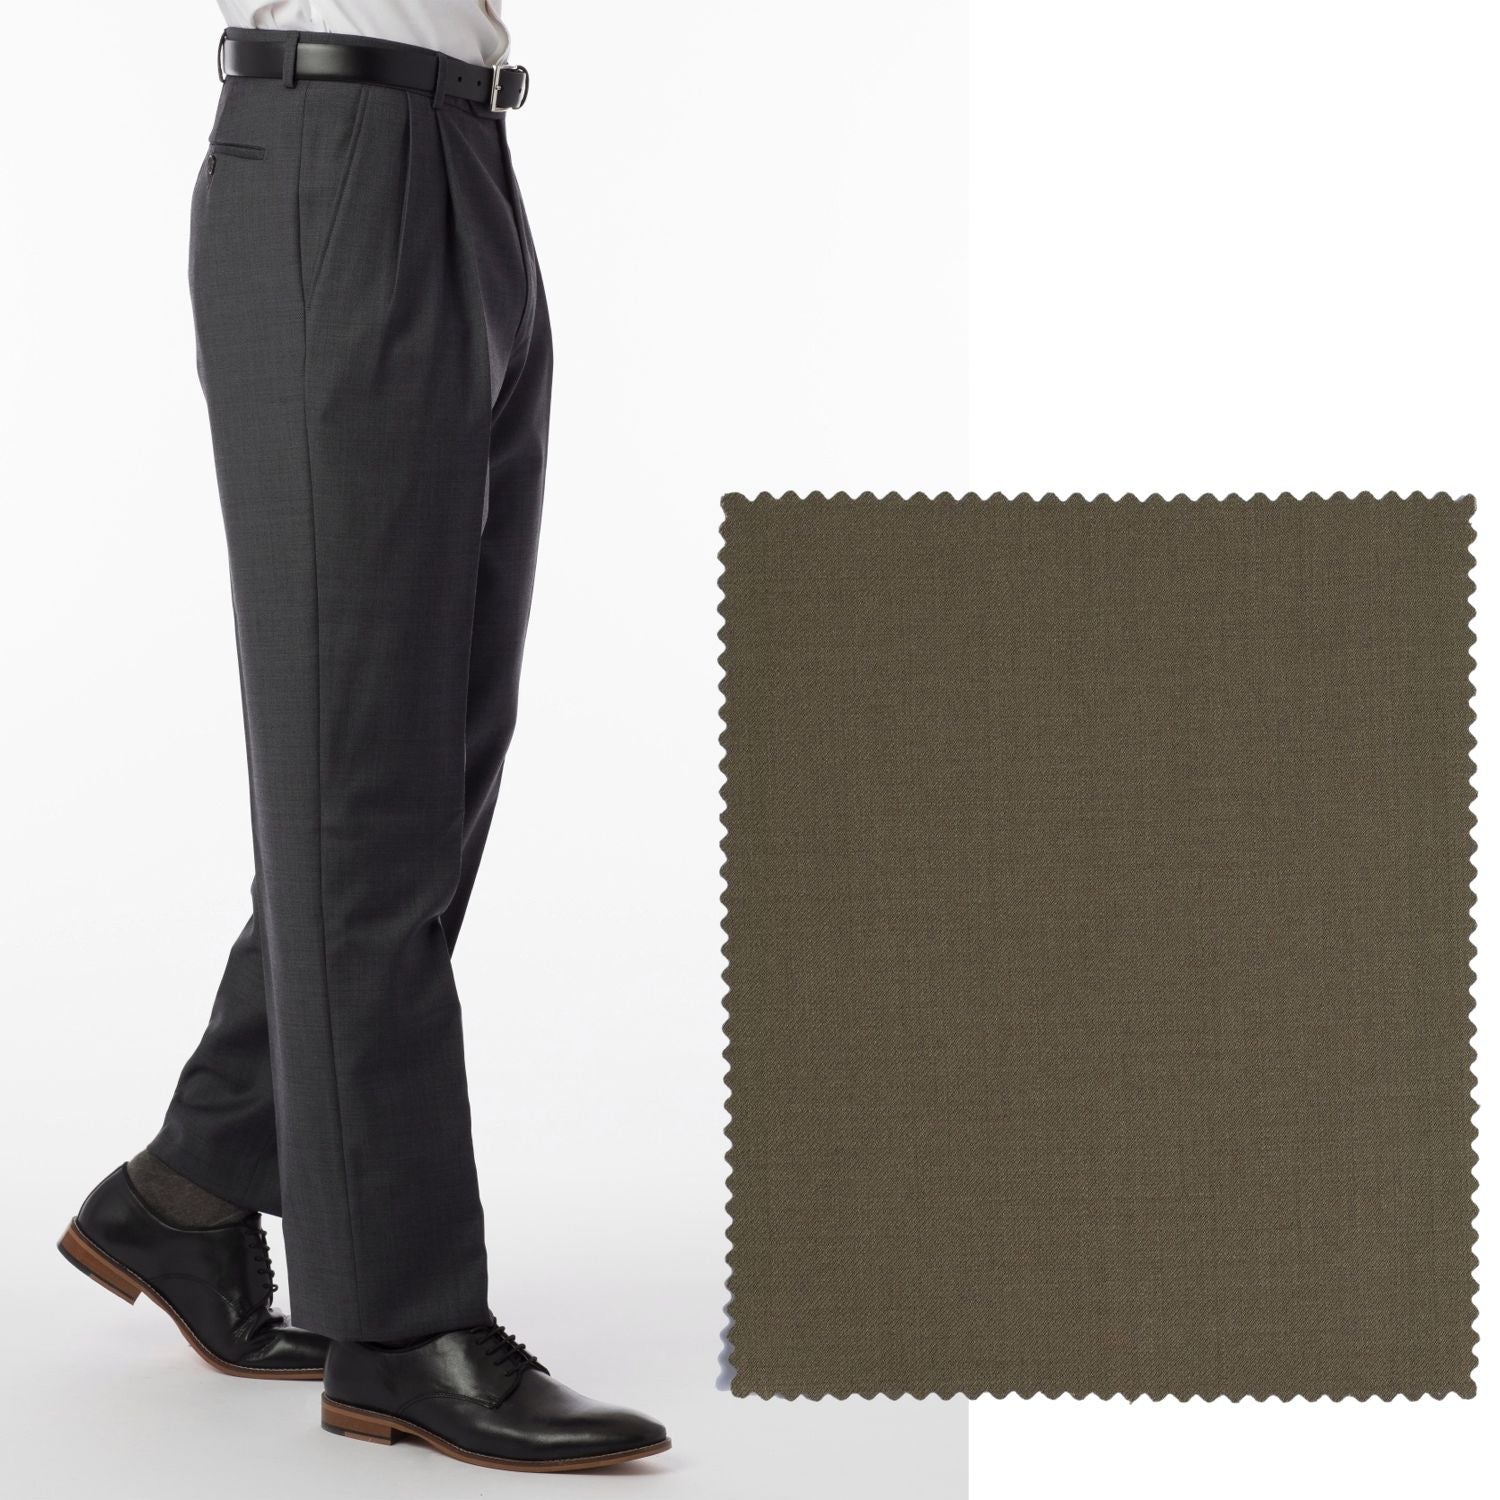 Super 120s Luxury Wool Serge Comfort-EZE Trouser in Olive (Manchester Pleated Model) by Ballin